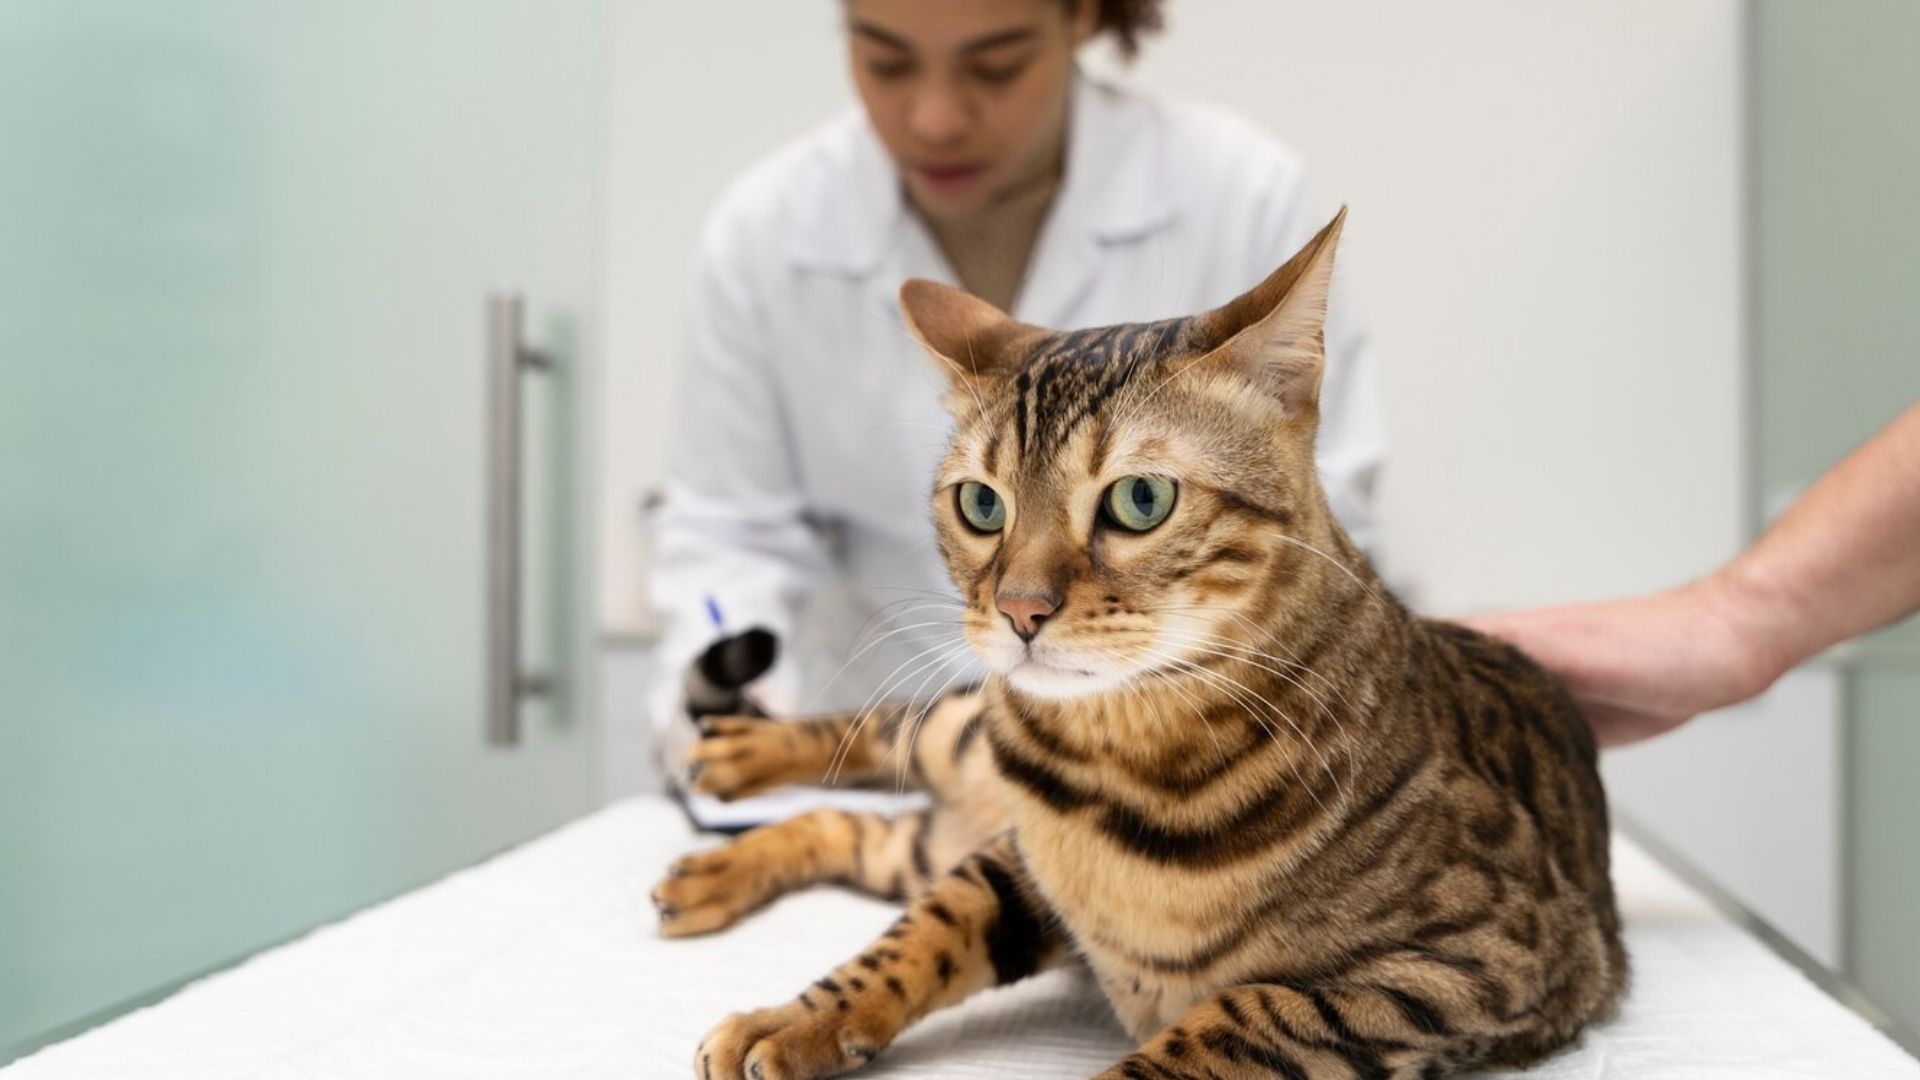 Vet doctor and cat